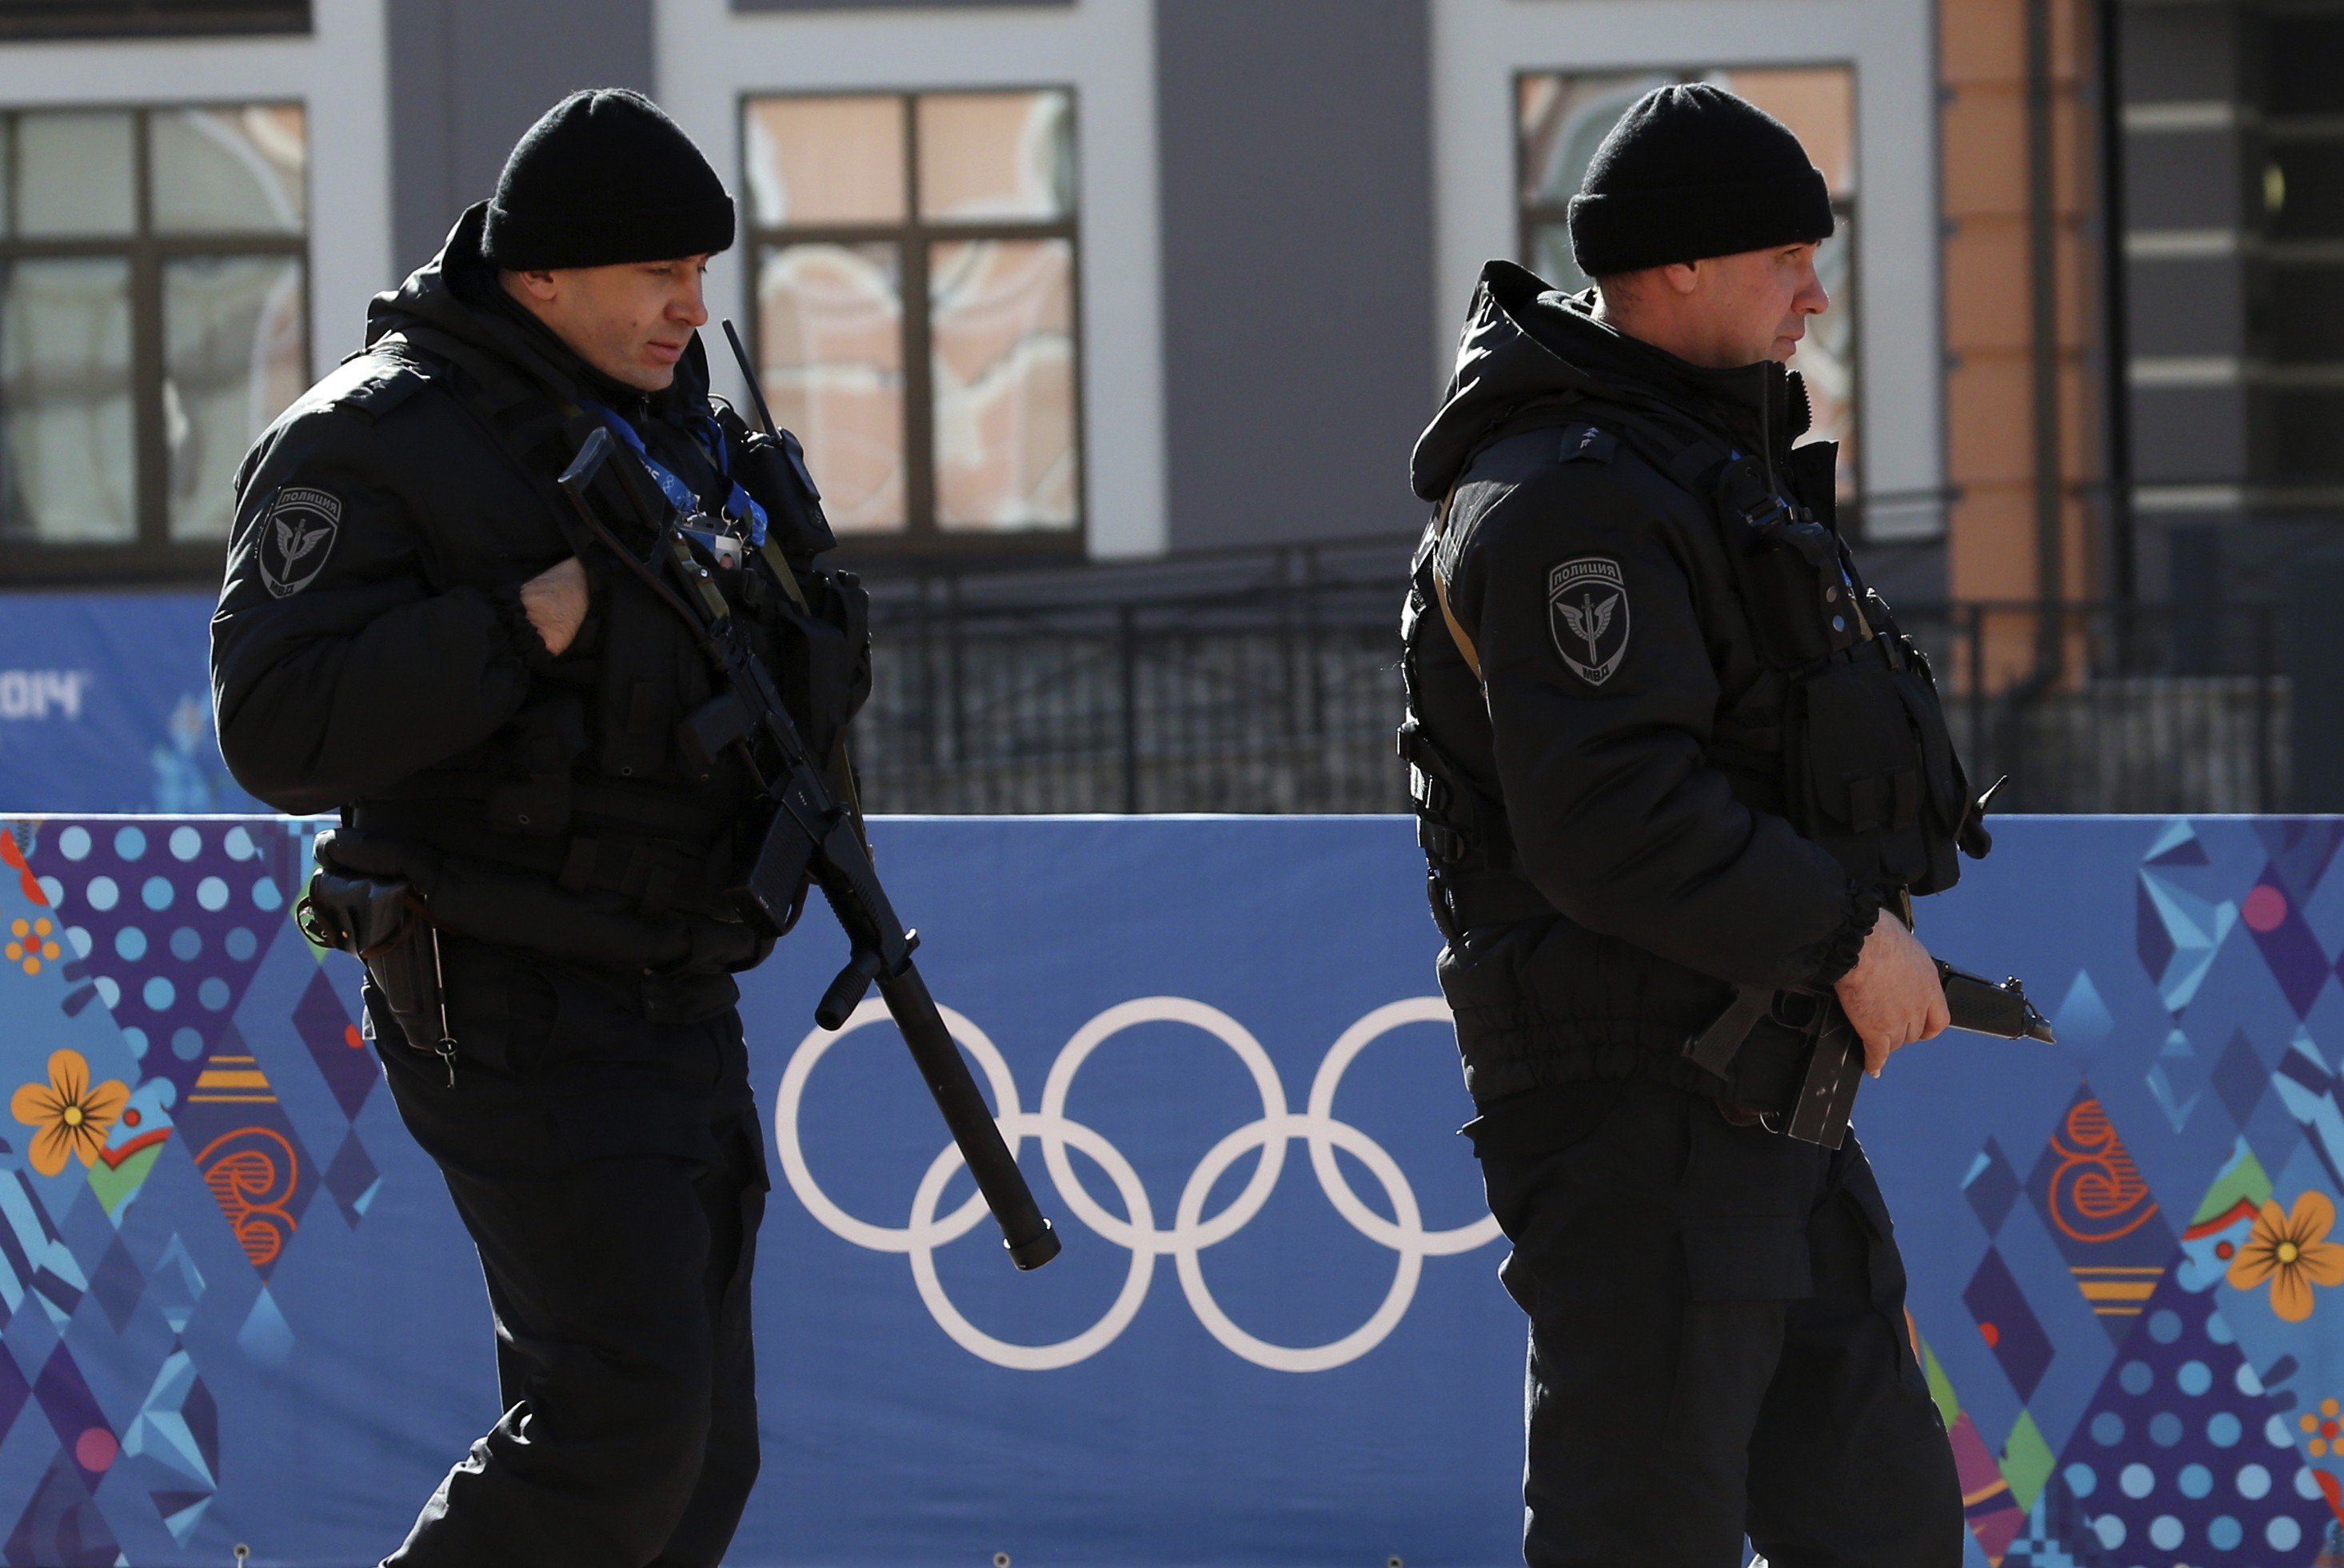 Russian security forces patrol the streets as preparations continue for the 2014 Sochi Winter Olympics in Rosa Khutor Feb. 6, 2014. (Sergei Karpukhin / Reuters)